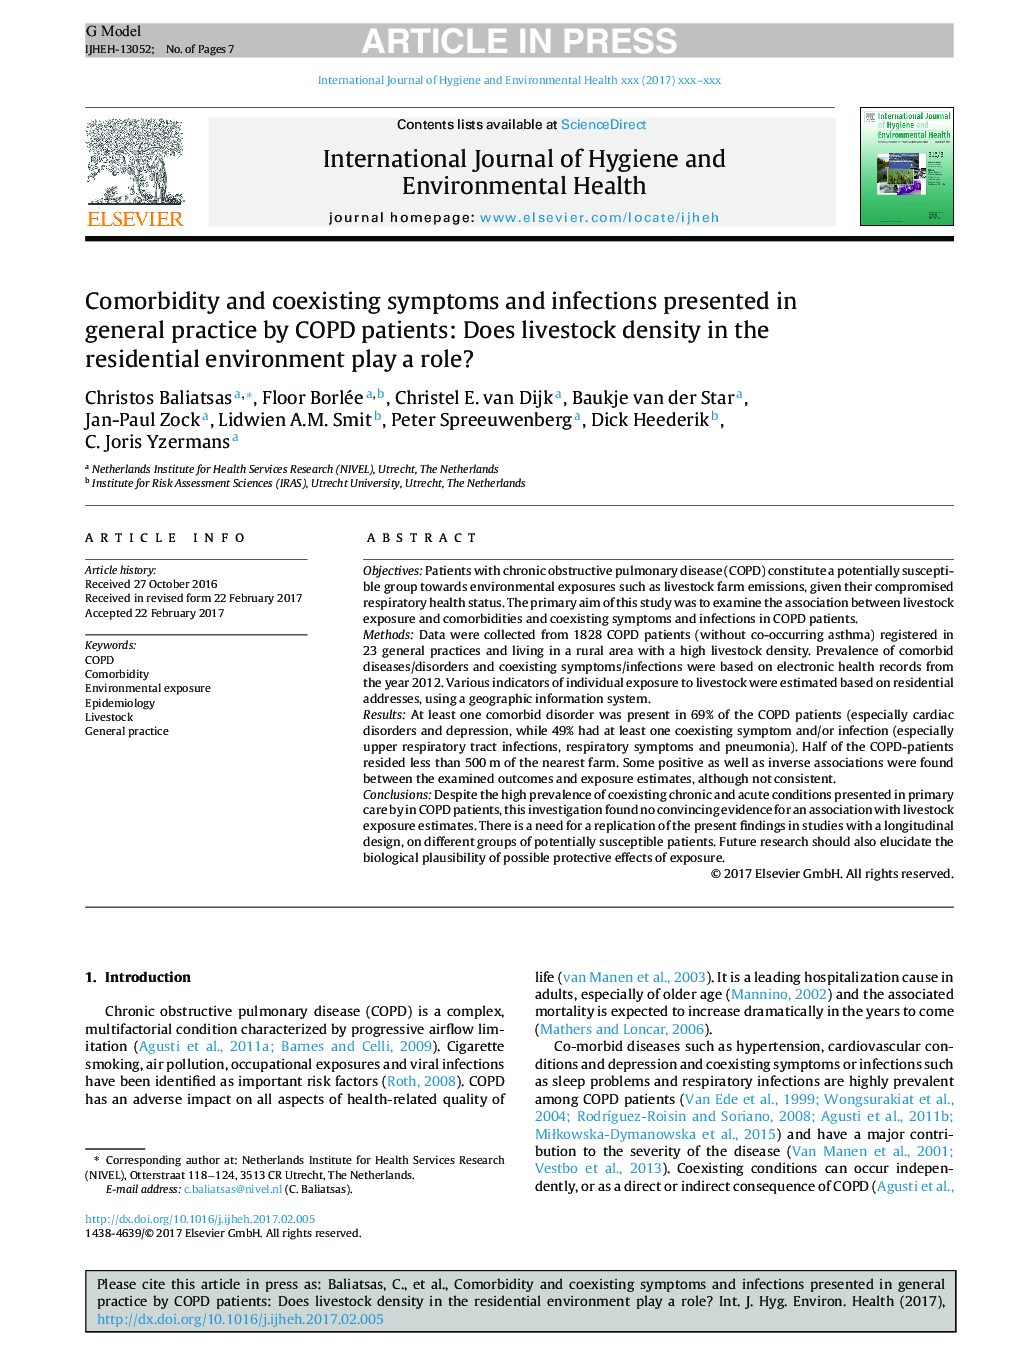 Comorbidity and coexisting symptoms and infections presented in general practice by COPD patients: Does livestock density in the residential environment play a role?